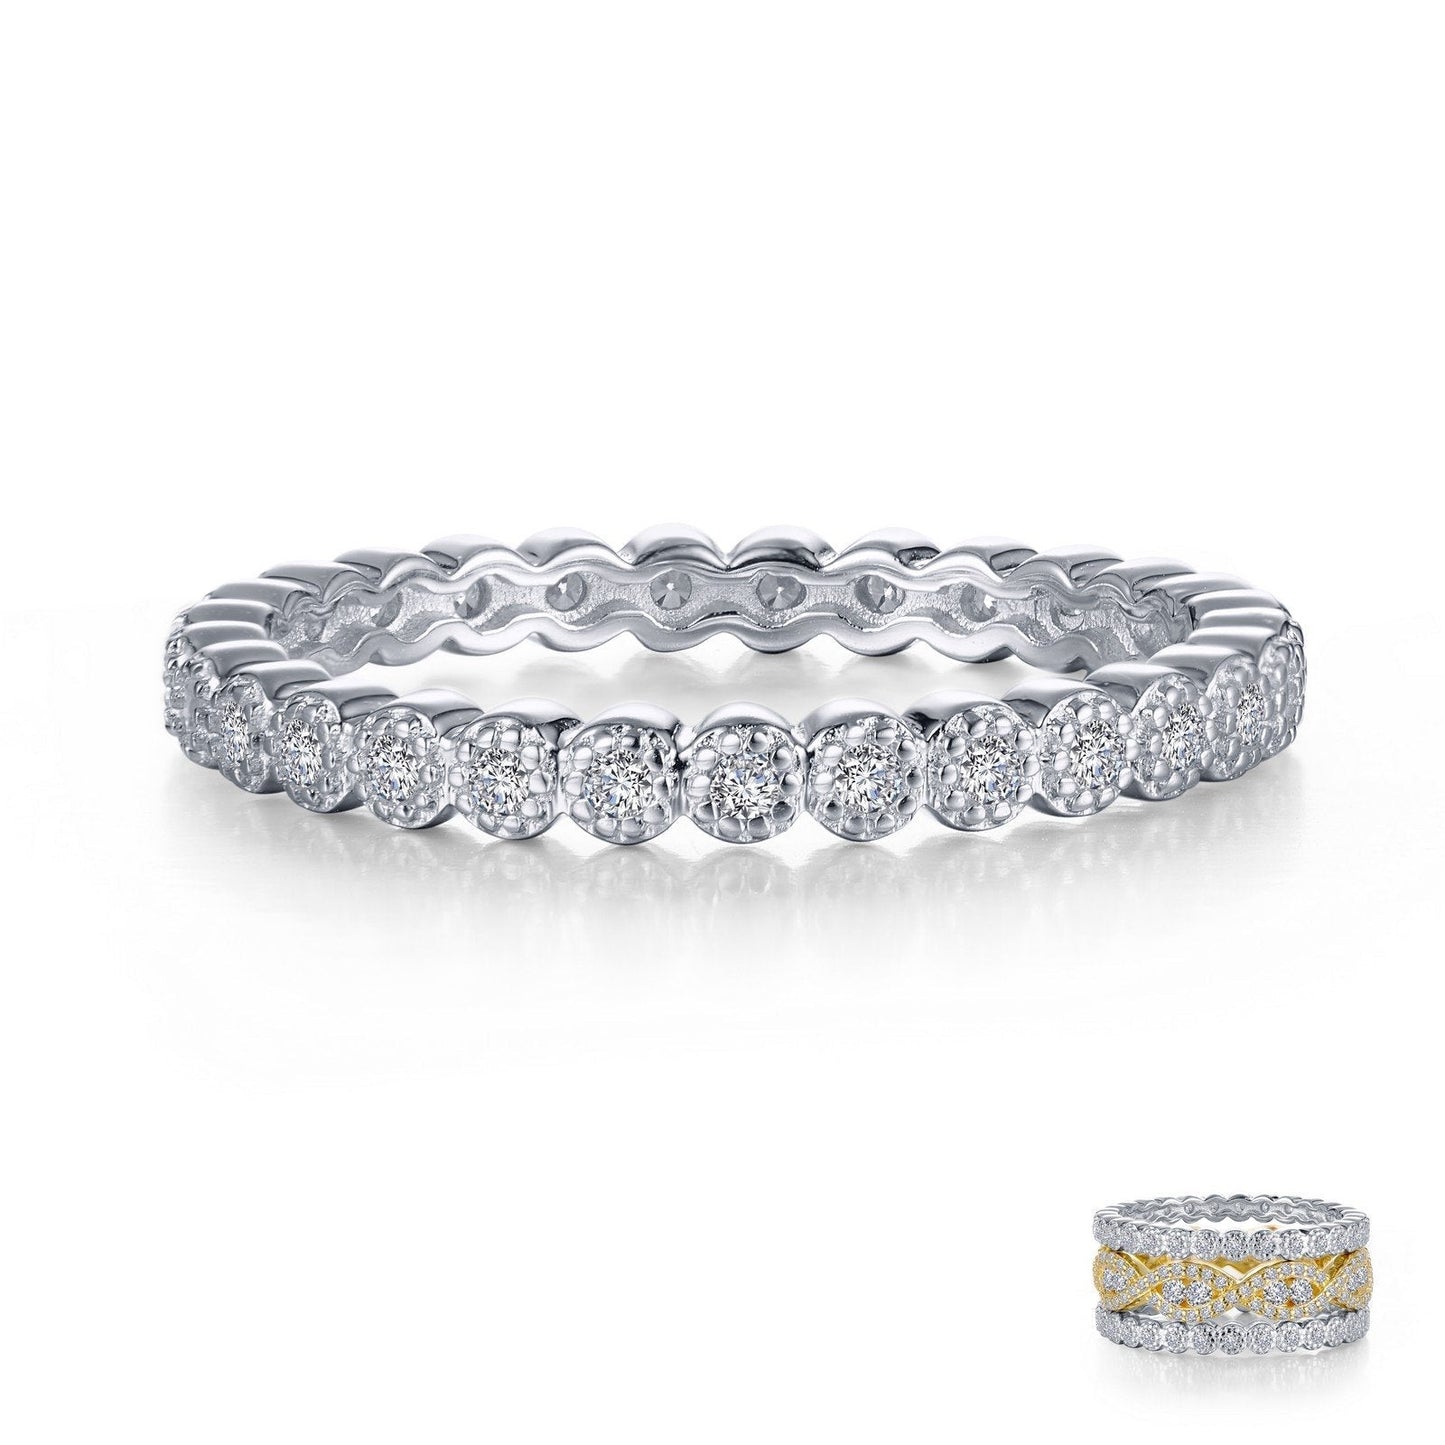 Lafonn 0.29 CTW Stackable Eternity Band Simulated Diamond RINGS Size 7 Platinum 0.29 CTS Approx.2.5mm(W)